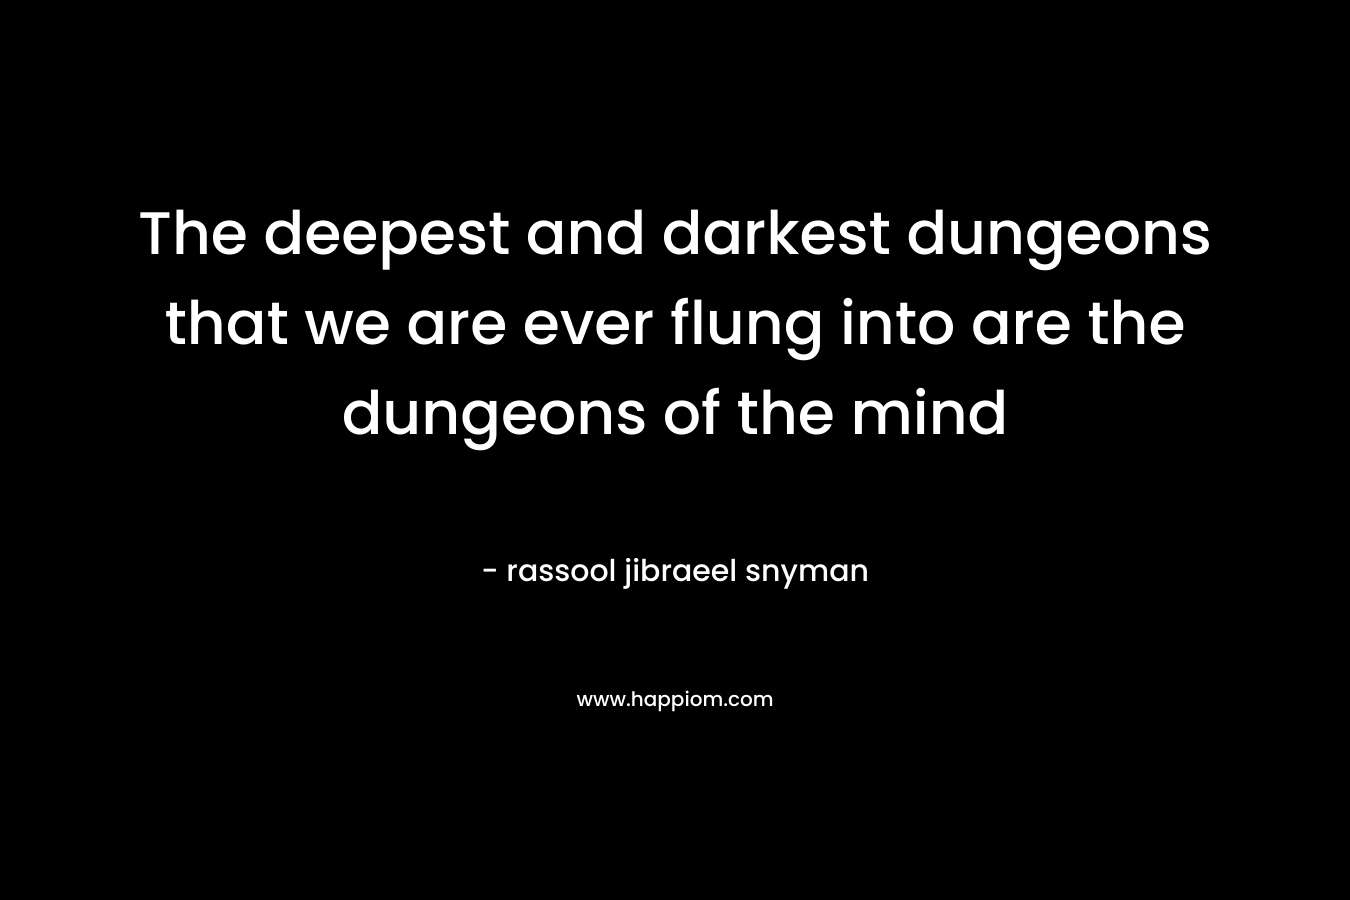 The deepest and darkest dungeons that we are ever flung into are the dungeons of the mind